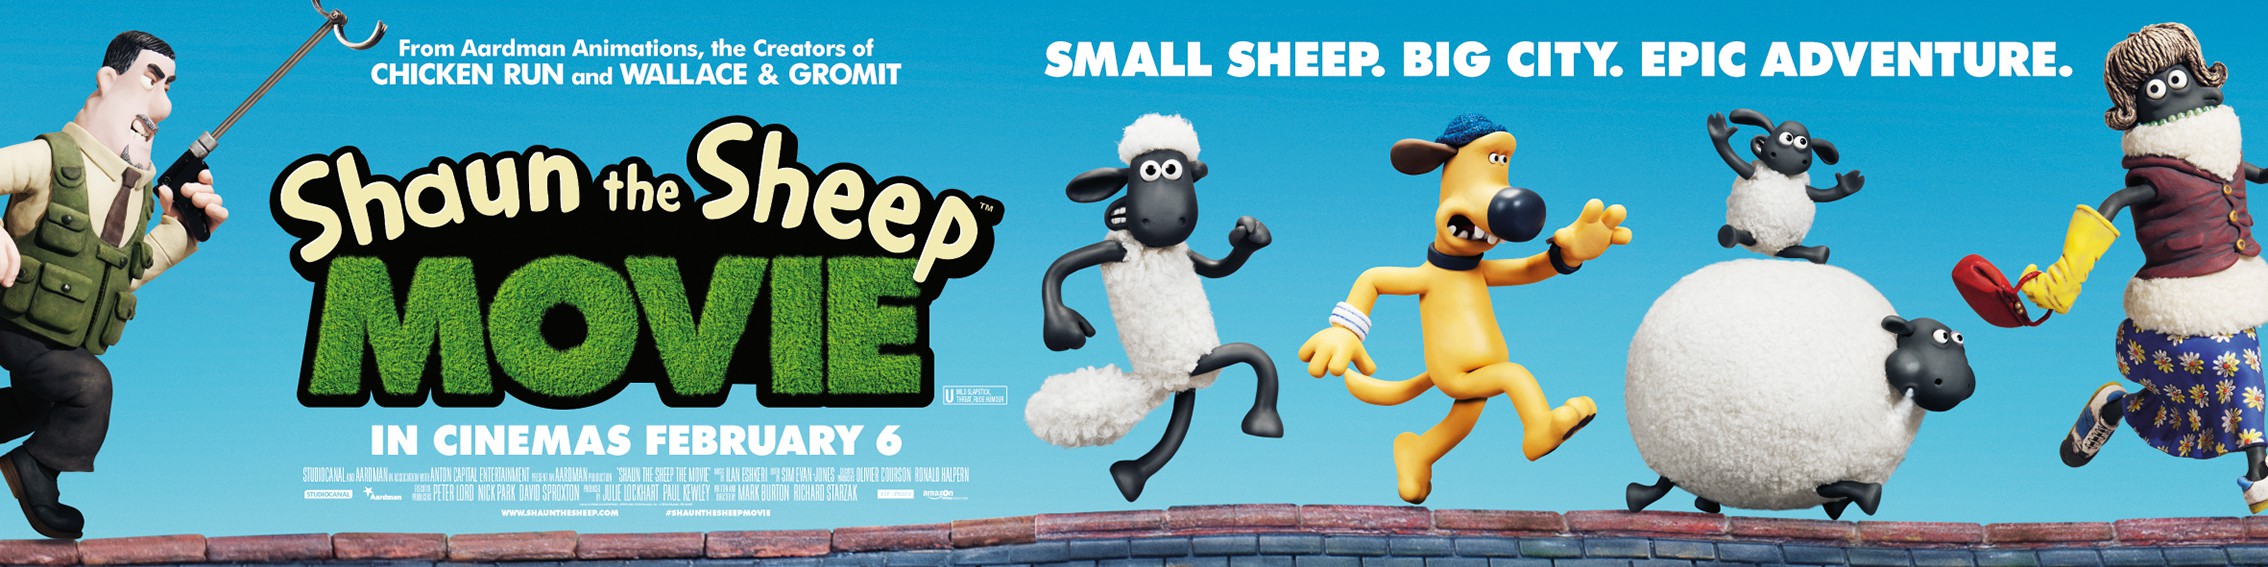 Mega Sized Movie Poster Image for Shaun the Sheep (#18 of 23)